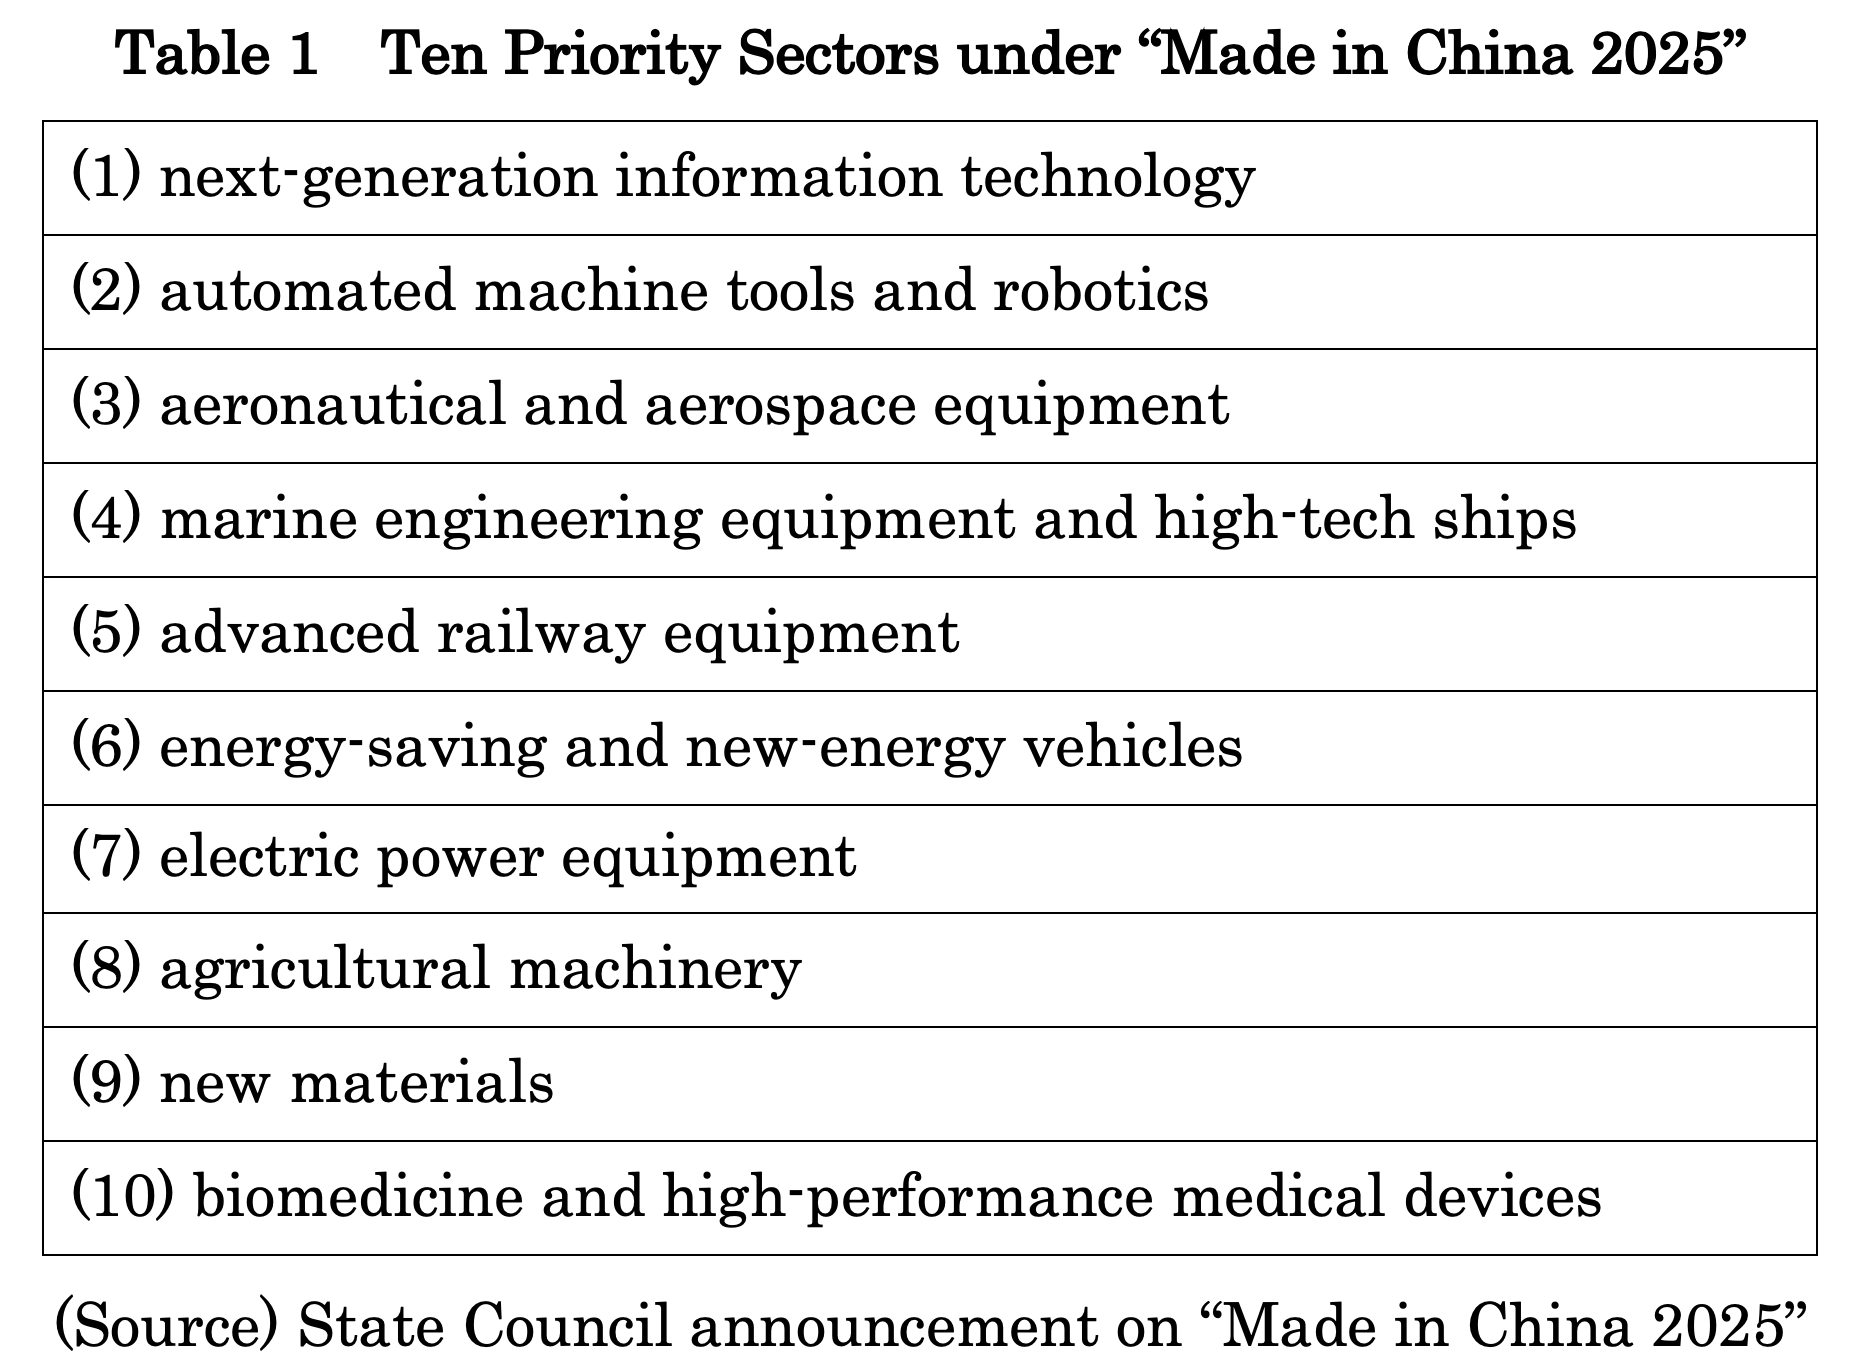 able 1  Ten Priority Sectors under “Made in China 2025”